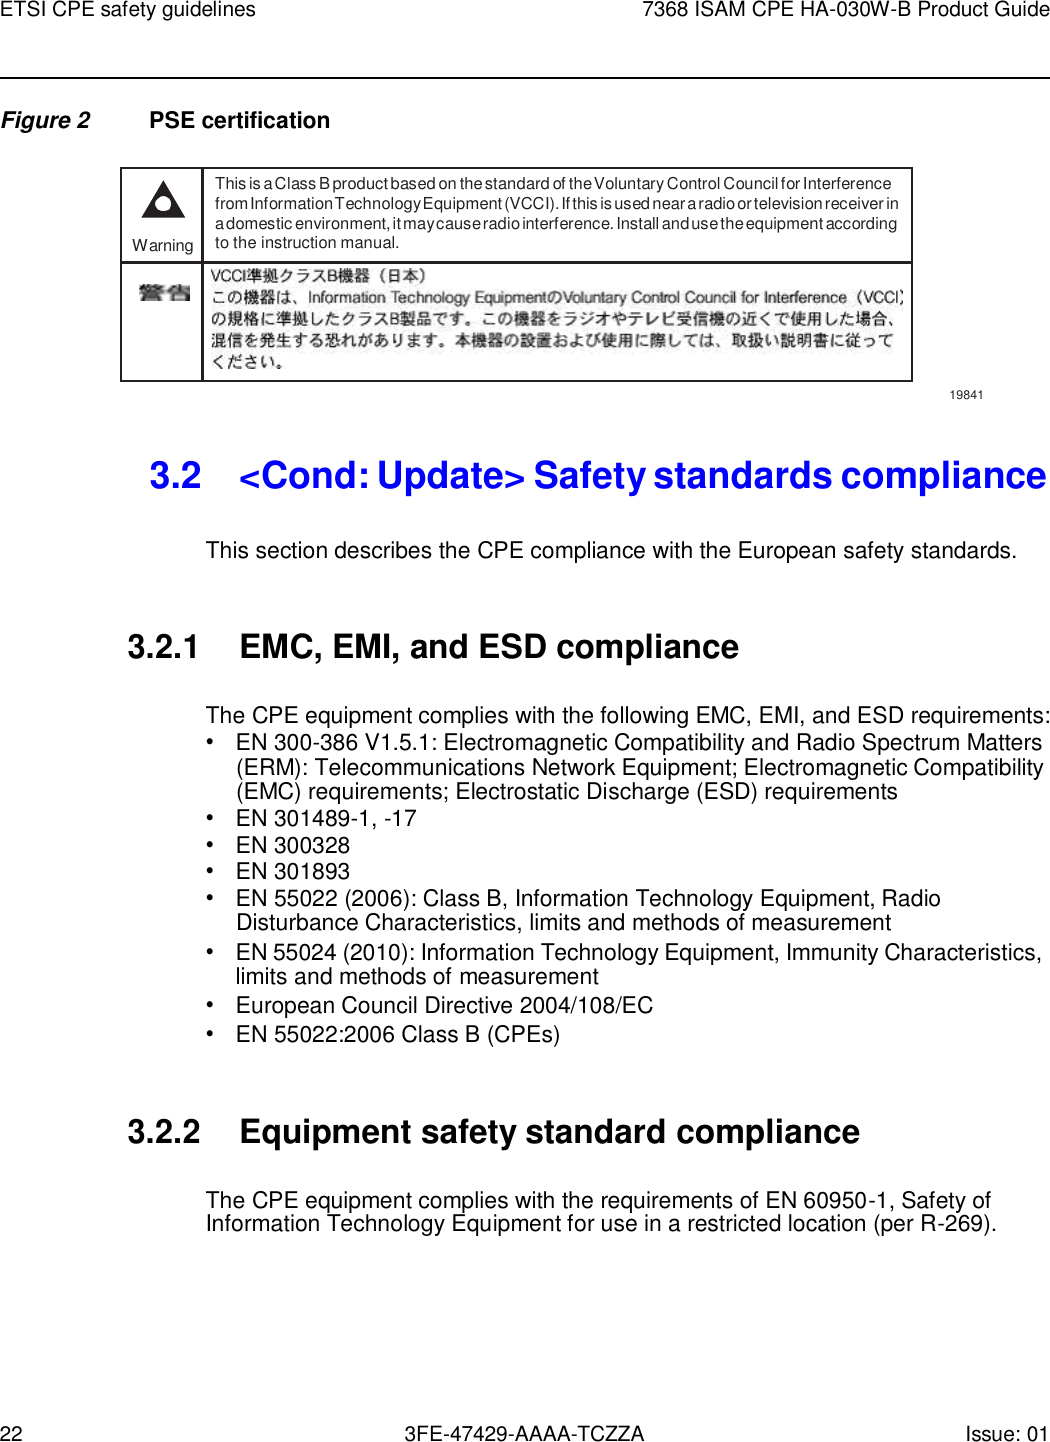 Page 22 of Nokia Bell HA030WB 7368 Intelligent Services Access Manager CPE User Manual 7368 ISAM CPE HA 020W A Product Guide